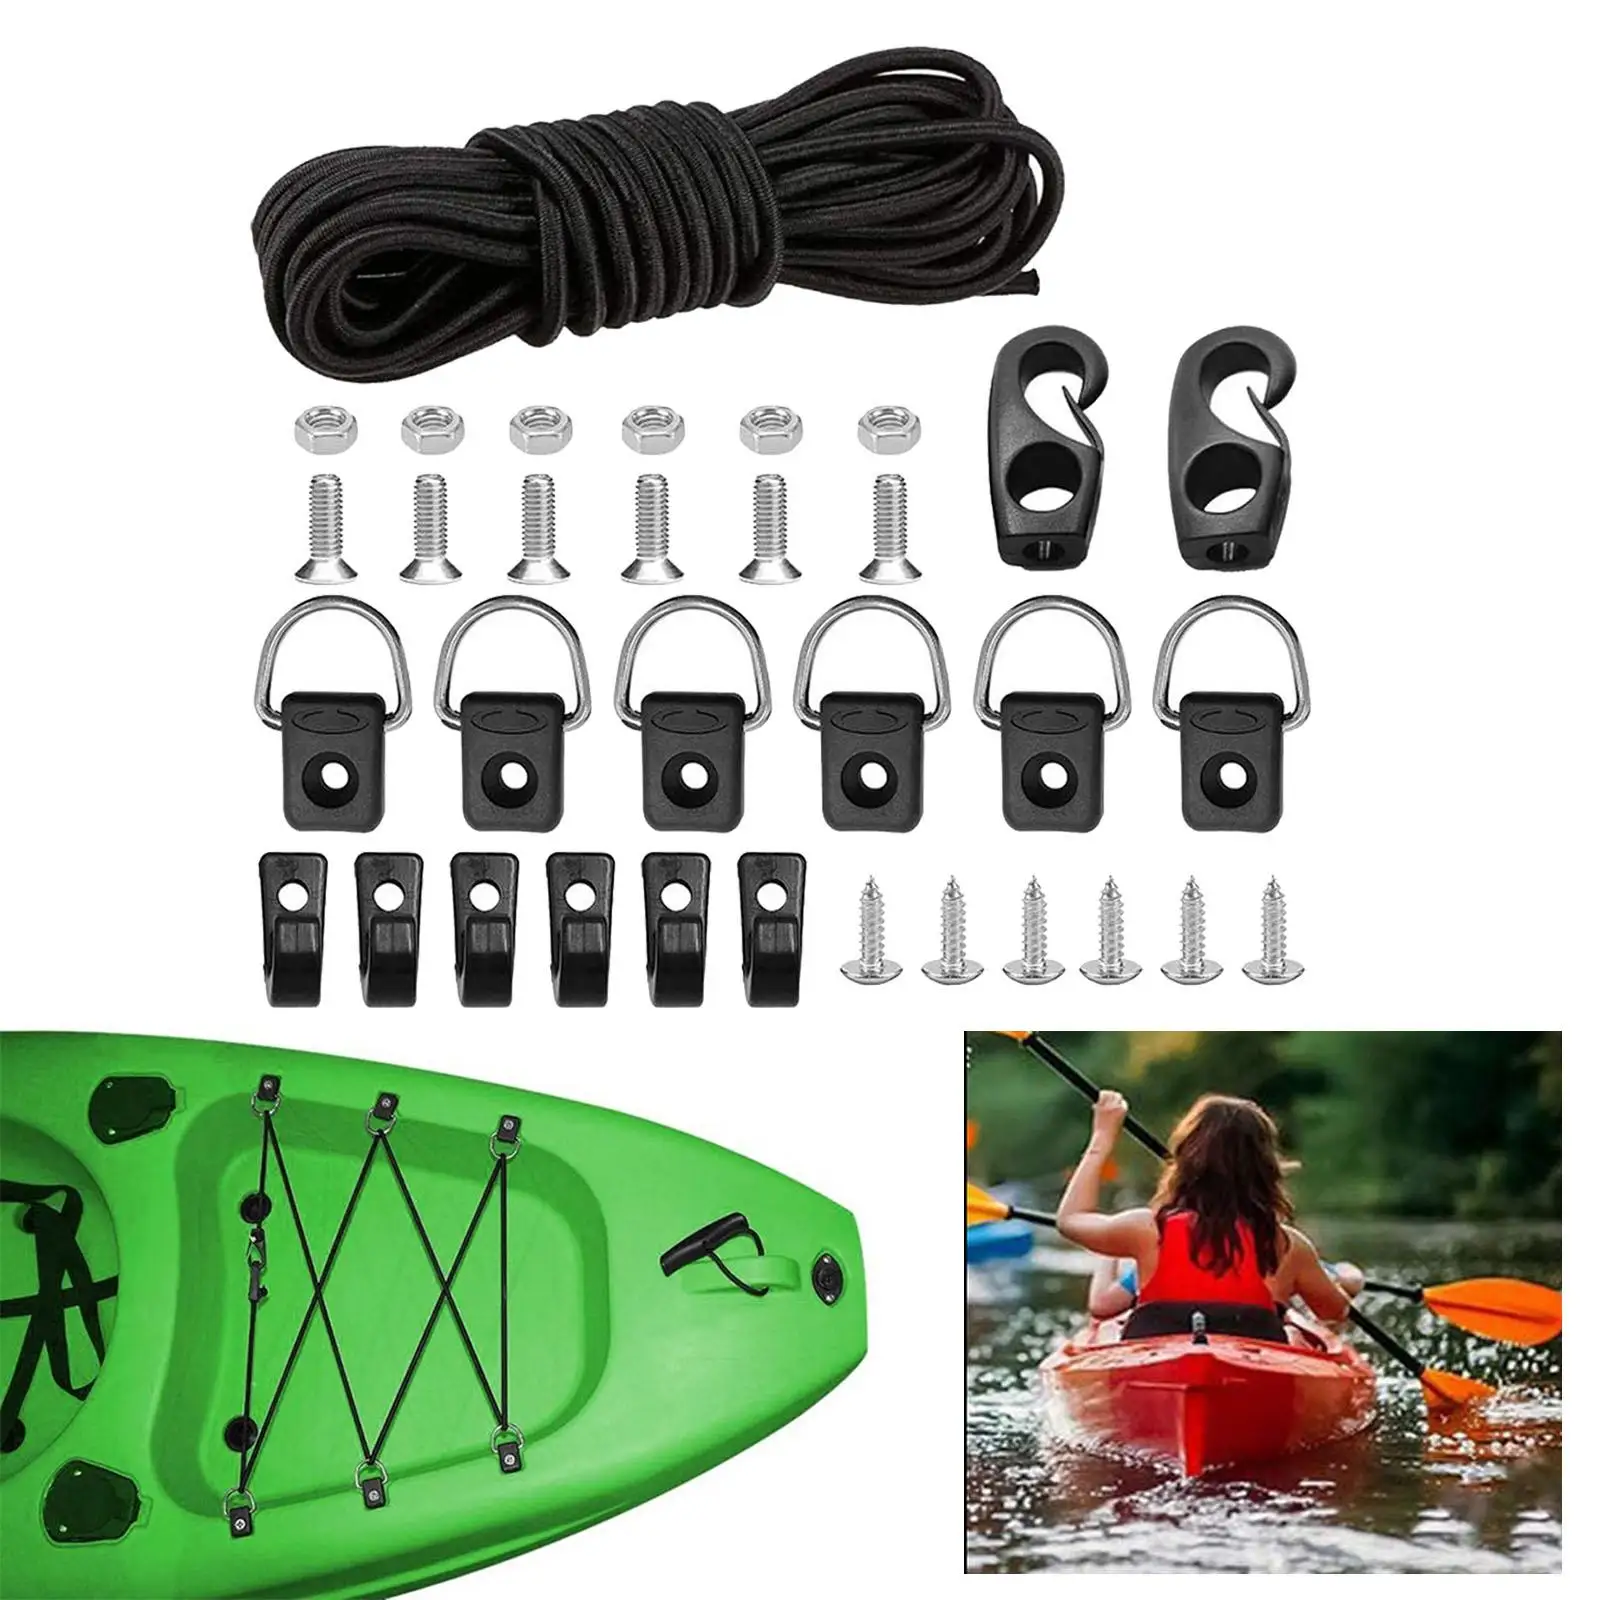 Kayak Deck Rigging Screws J Hooks D Rings Bungee Cord for Camping Outfitting Boat Canoe Accessories